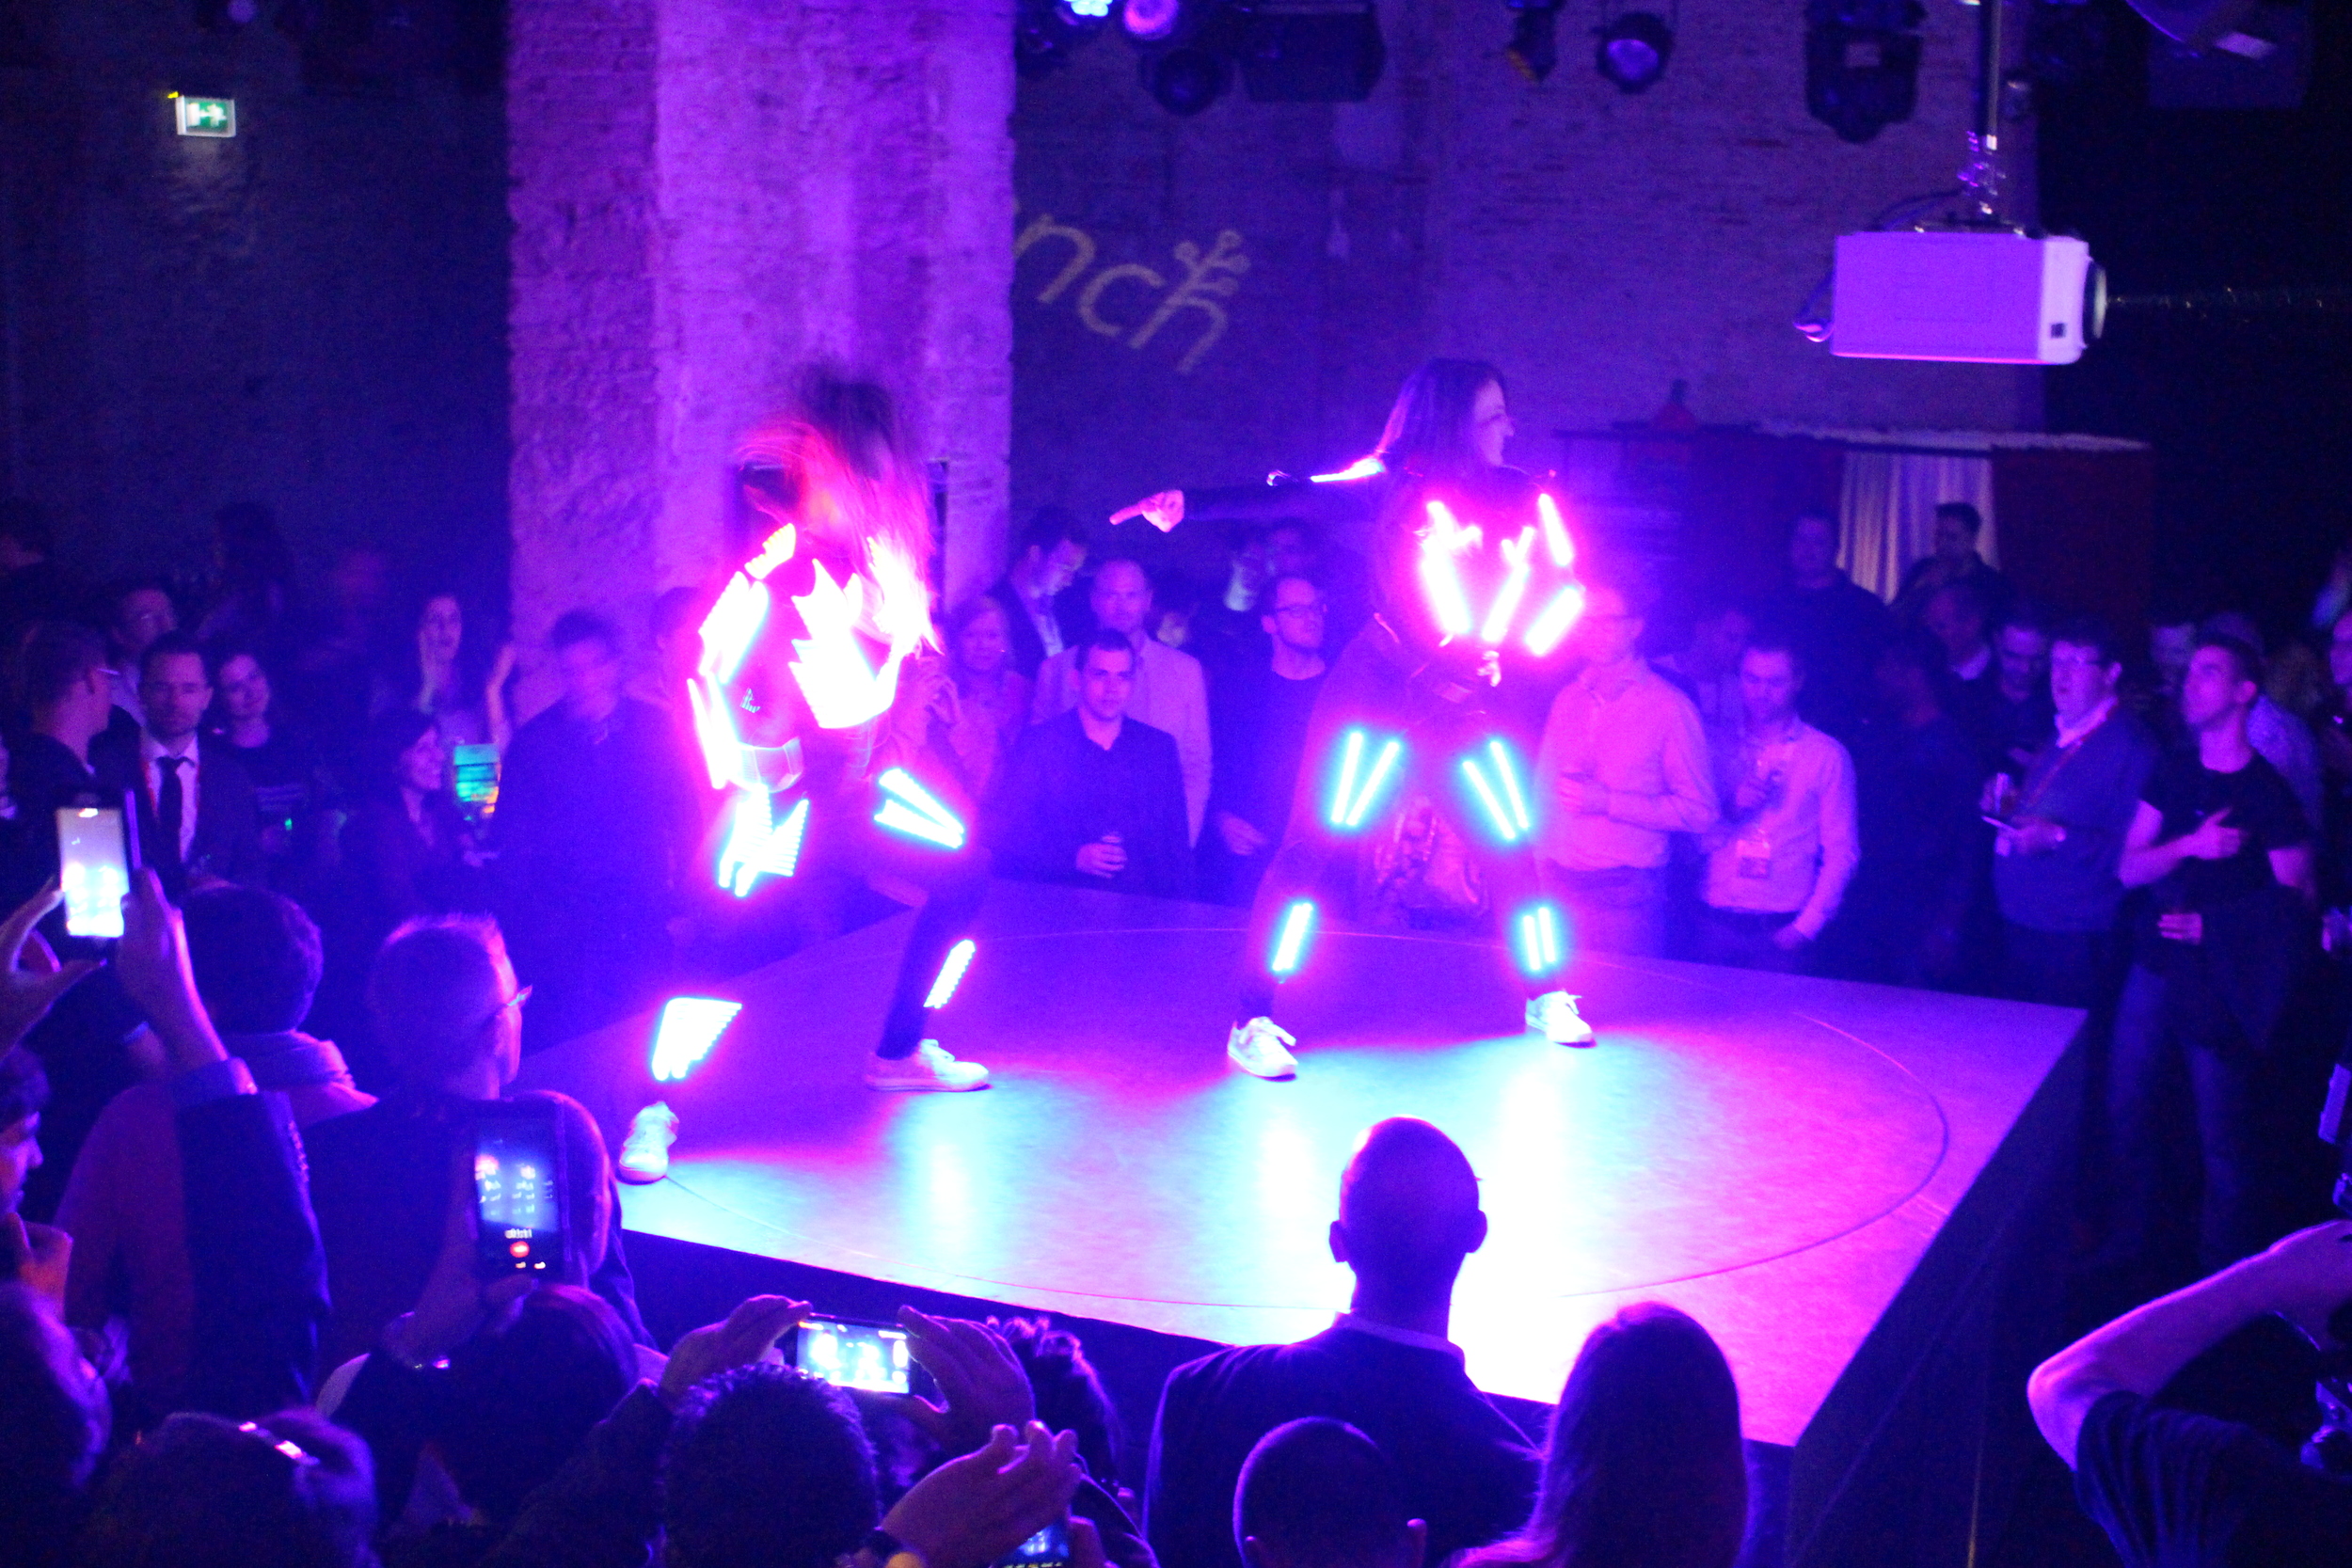 Light dancers at the Mobile Marketing Party